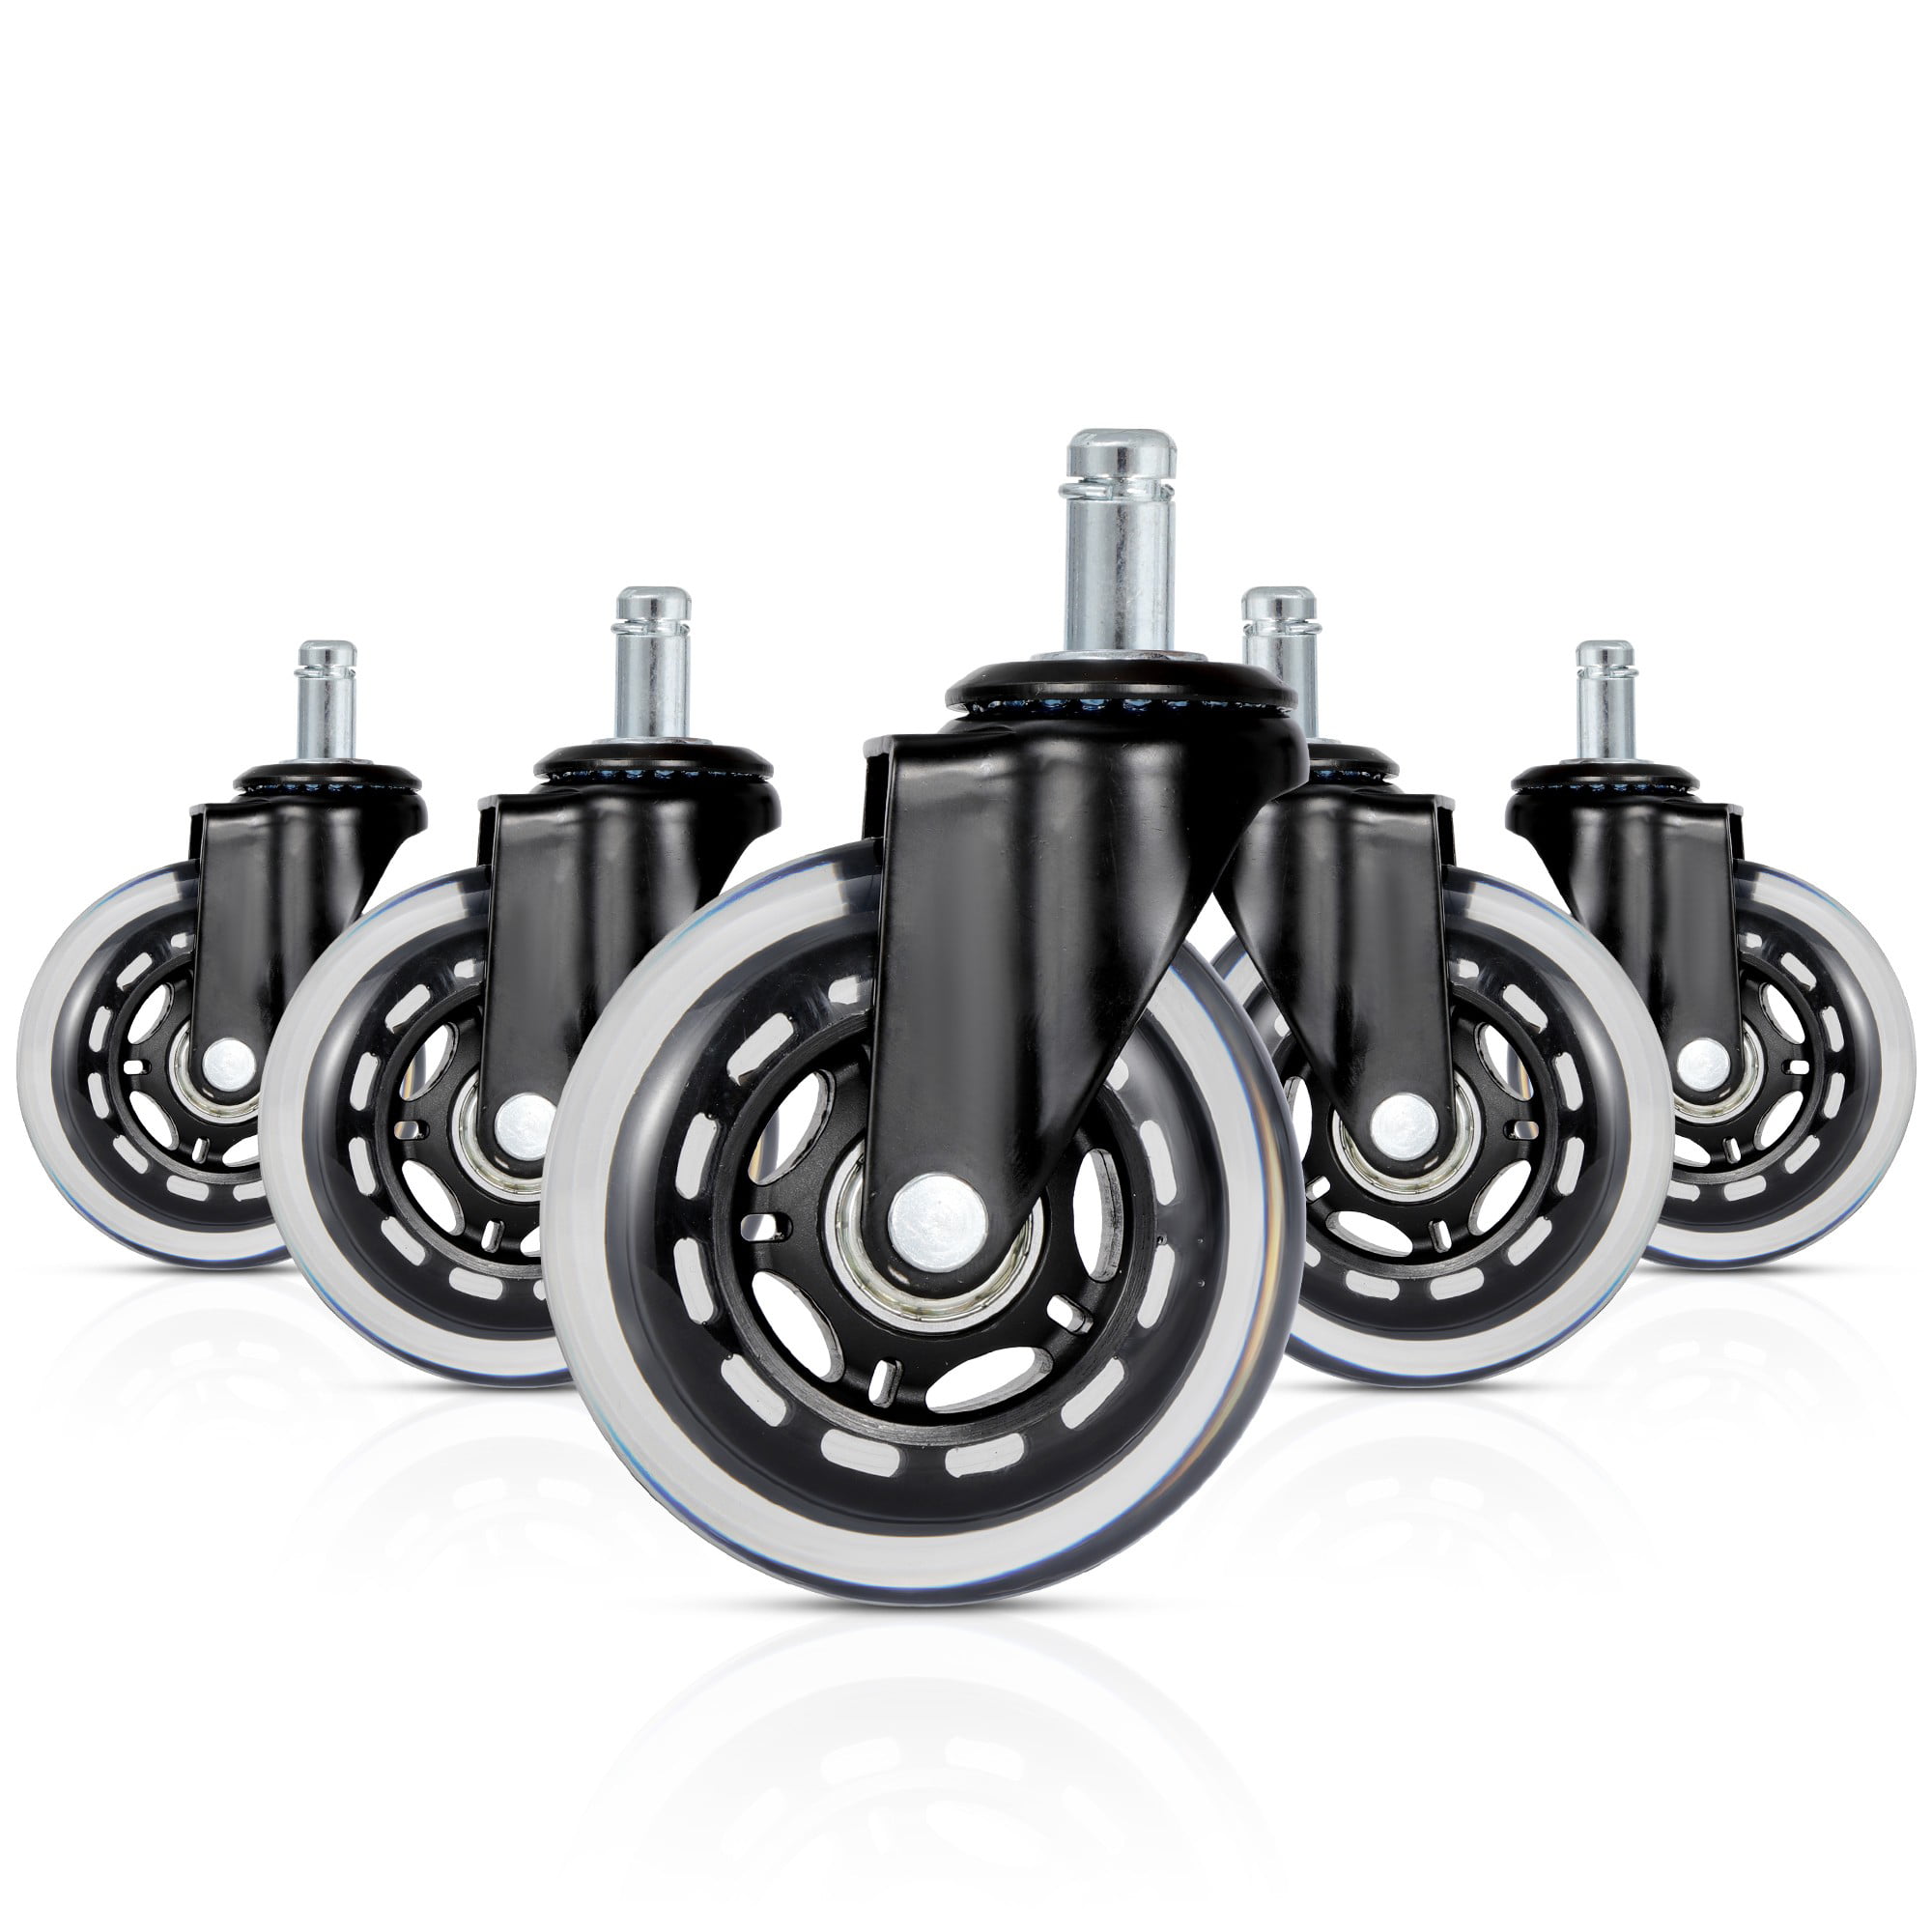 Office Chair Wheels Rollerblade Casters, Office Chair Casters For Hardwood Floors